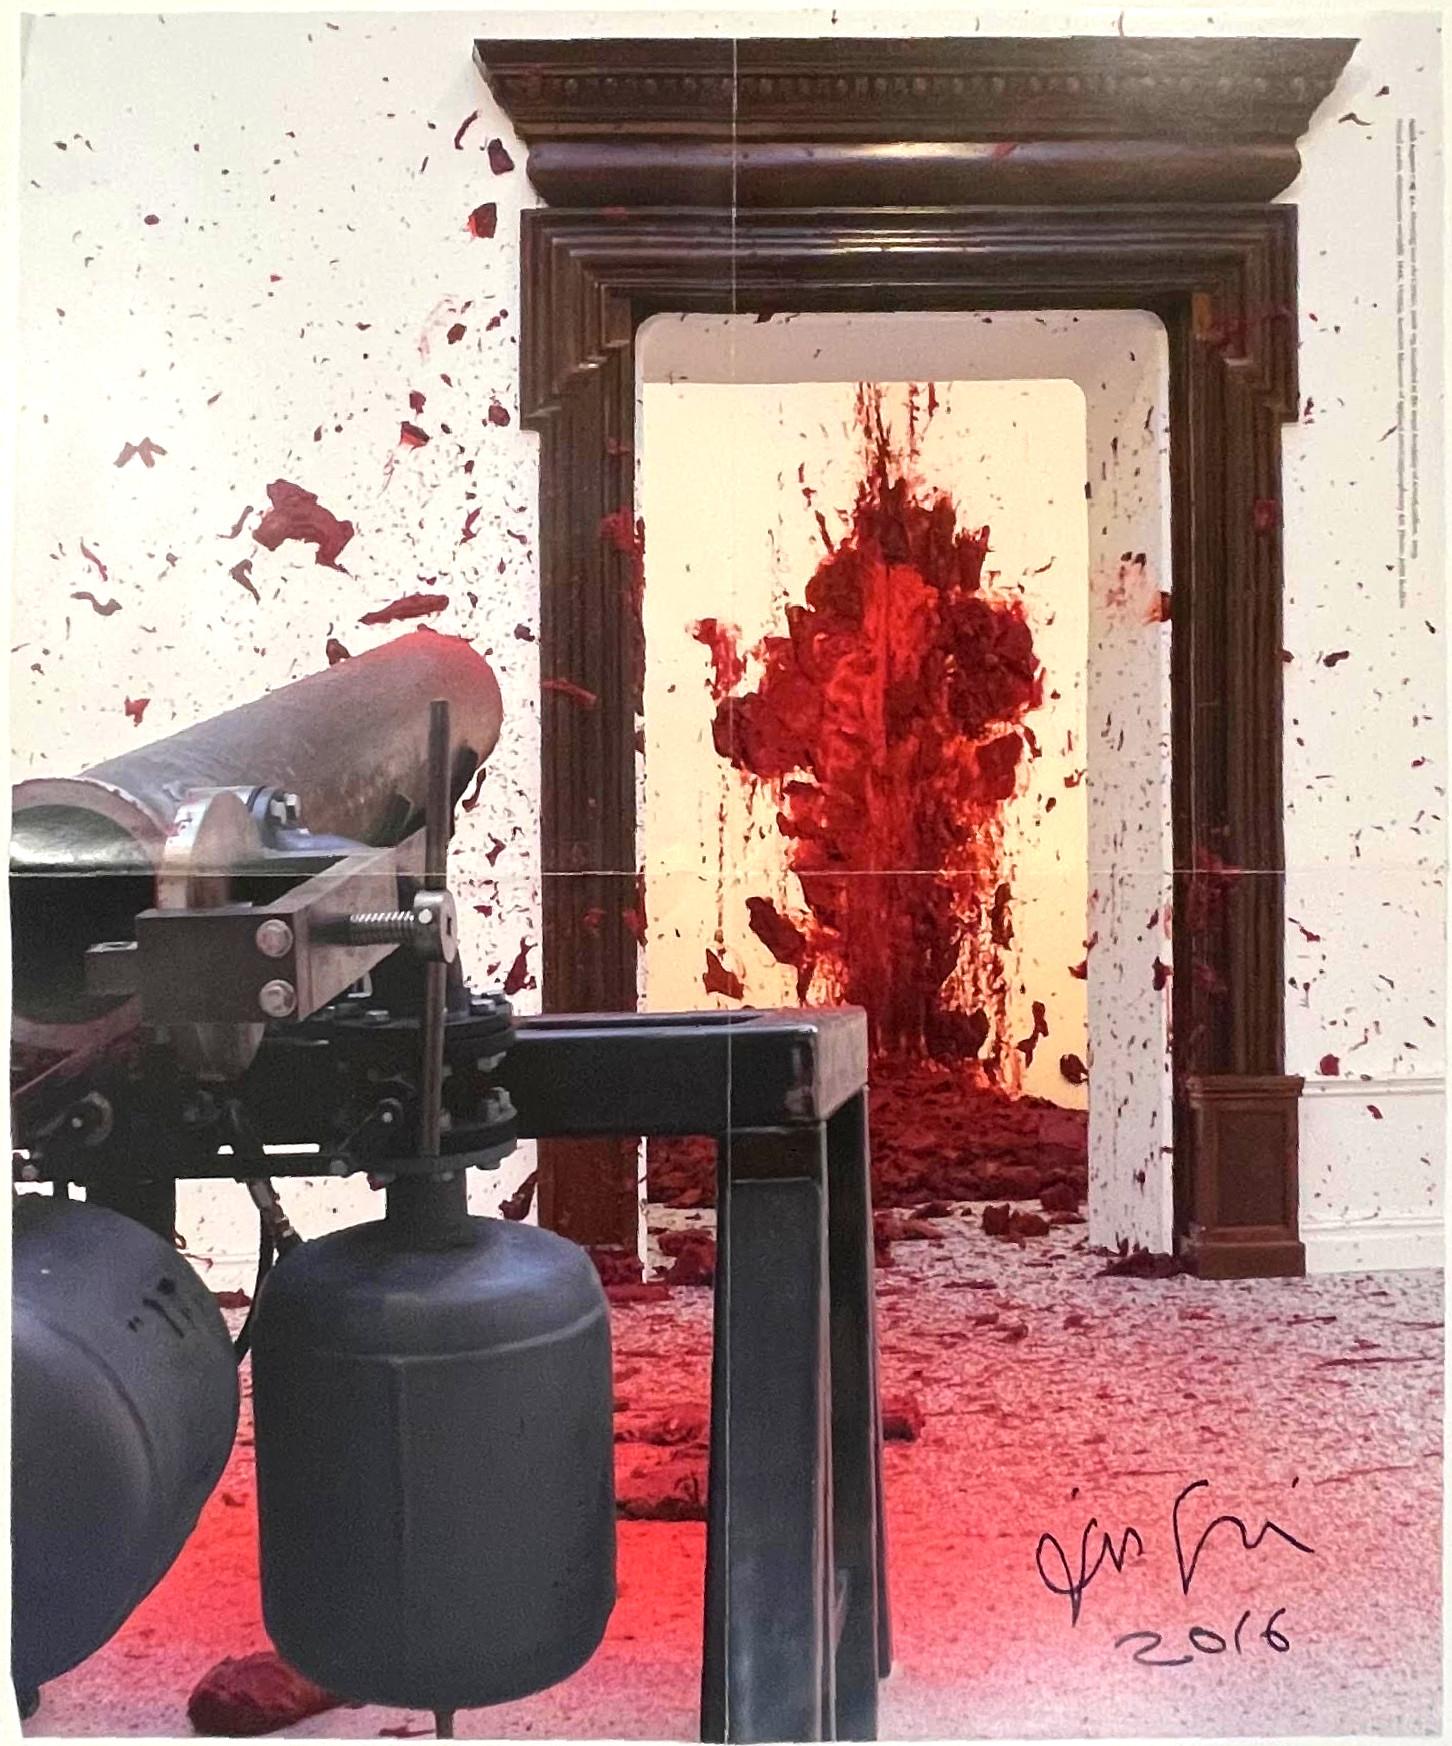 Shooting into the Corner Poster (hand signed and dated by Anish Kapoor)